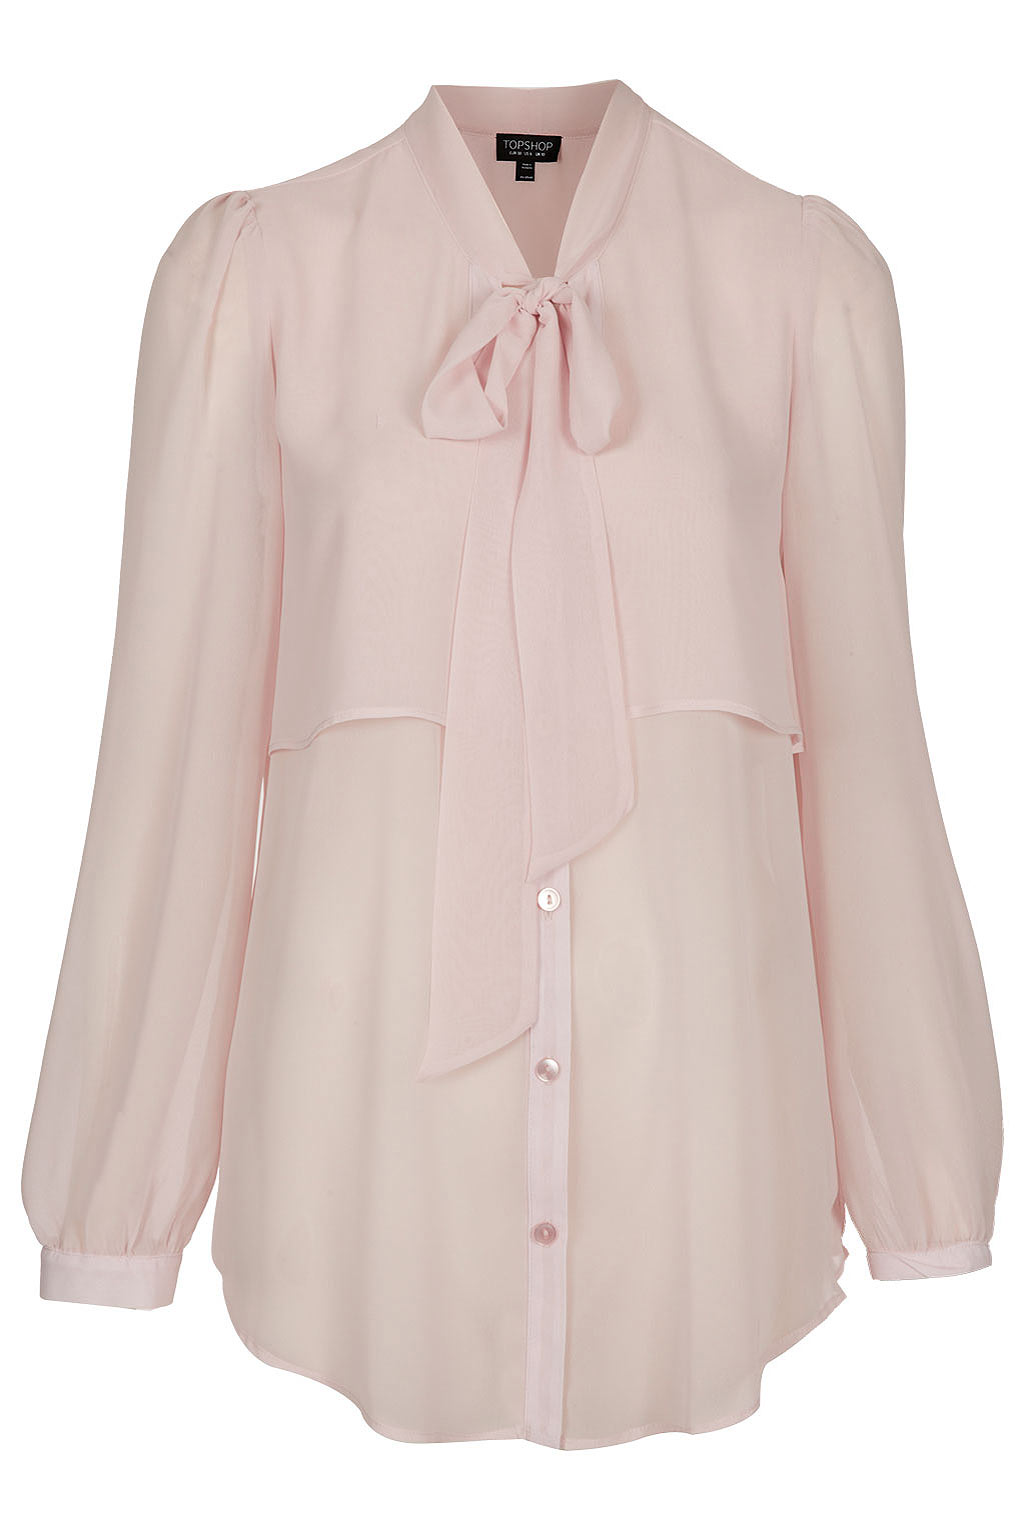 Topshop Cape Pussybow Blouse in Pink | Lyst